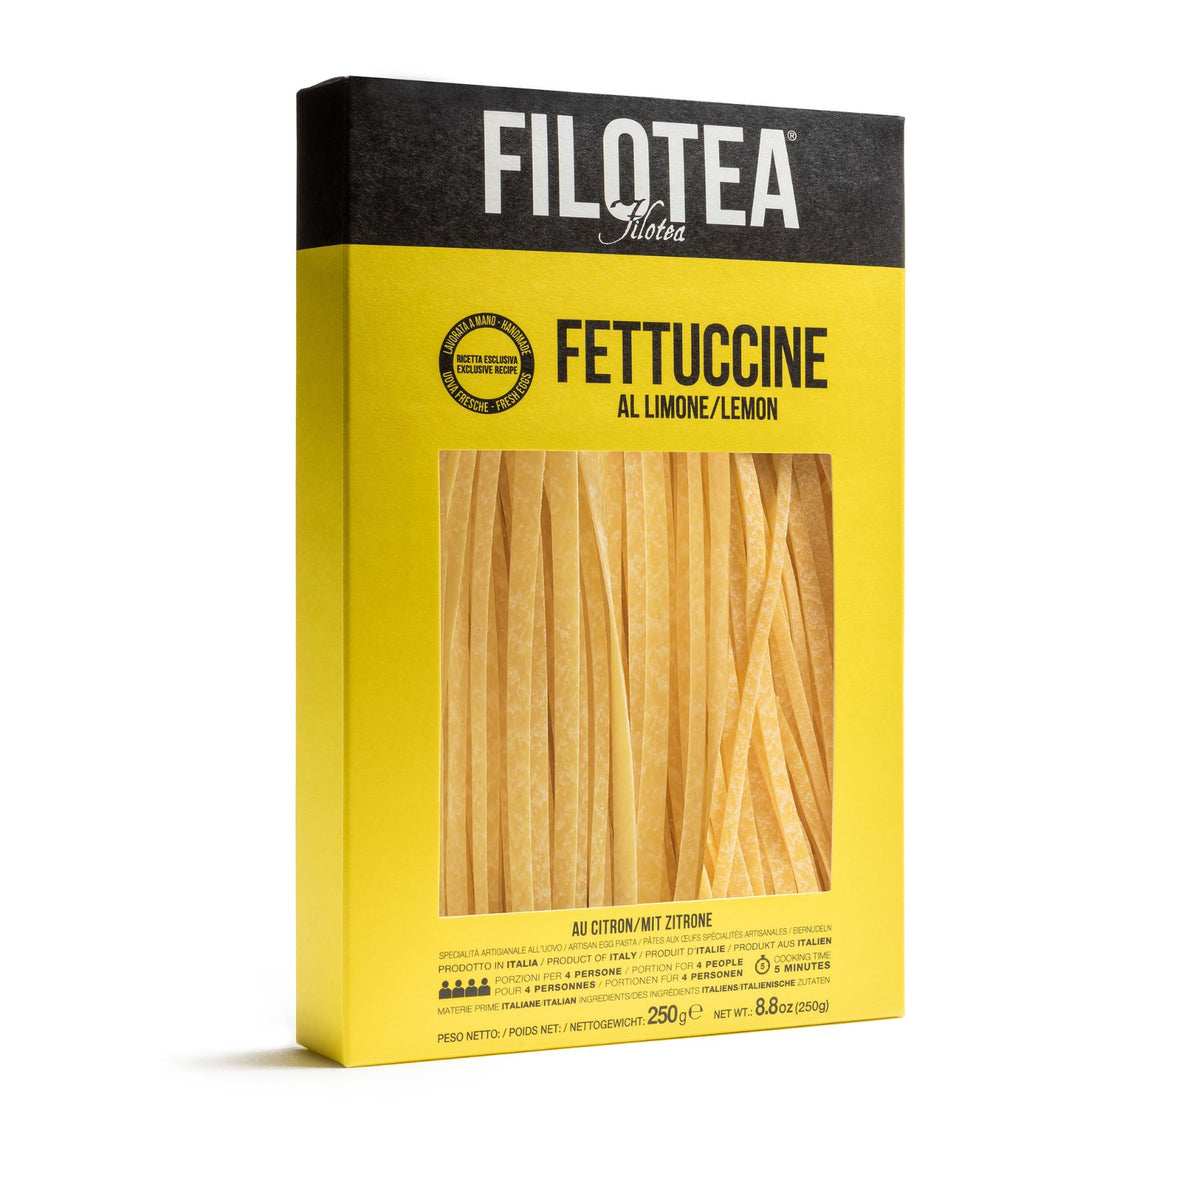 Filotea Lemon Fettuccine Artisan Egg Pasta 250g | Imported and distributed in the UK by Just Gourmet Foods